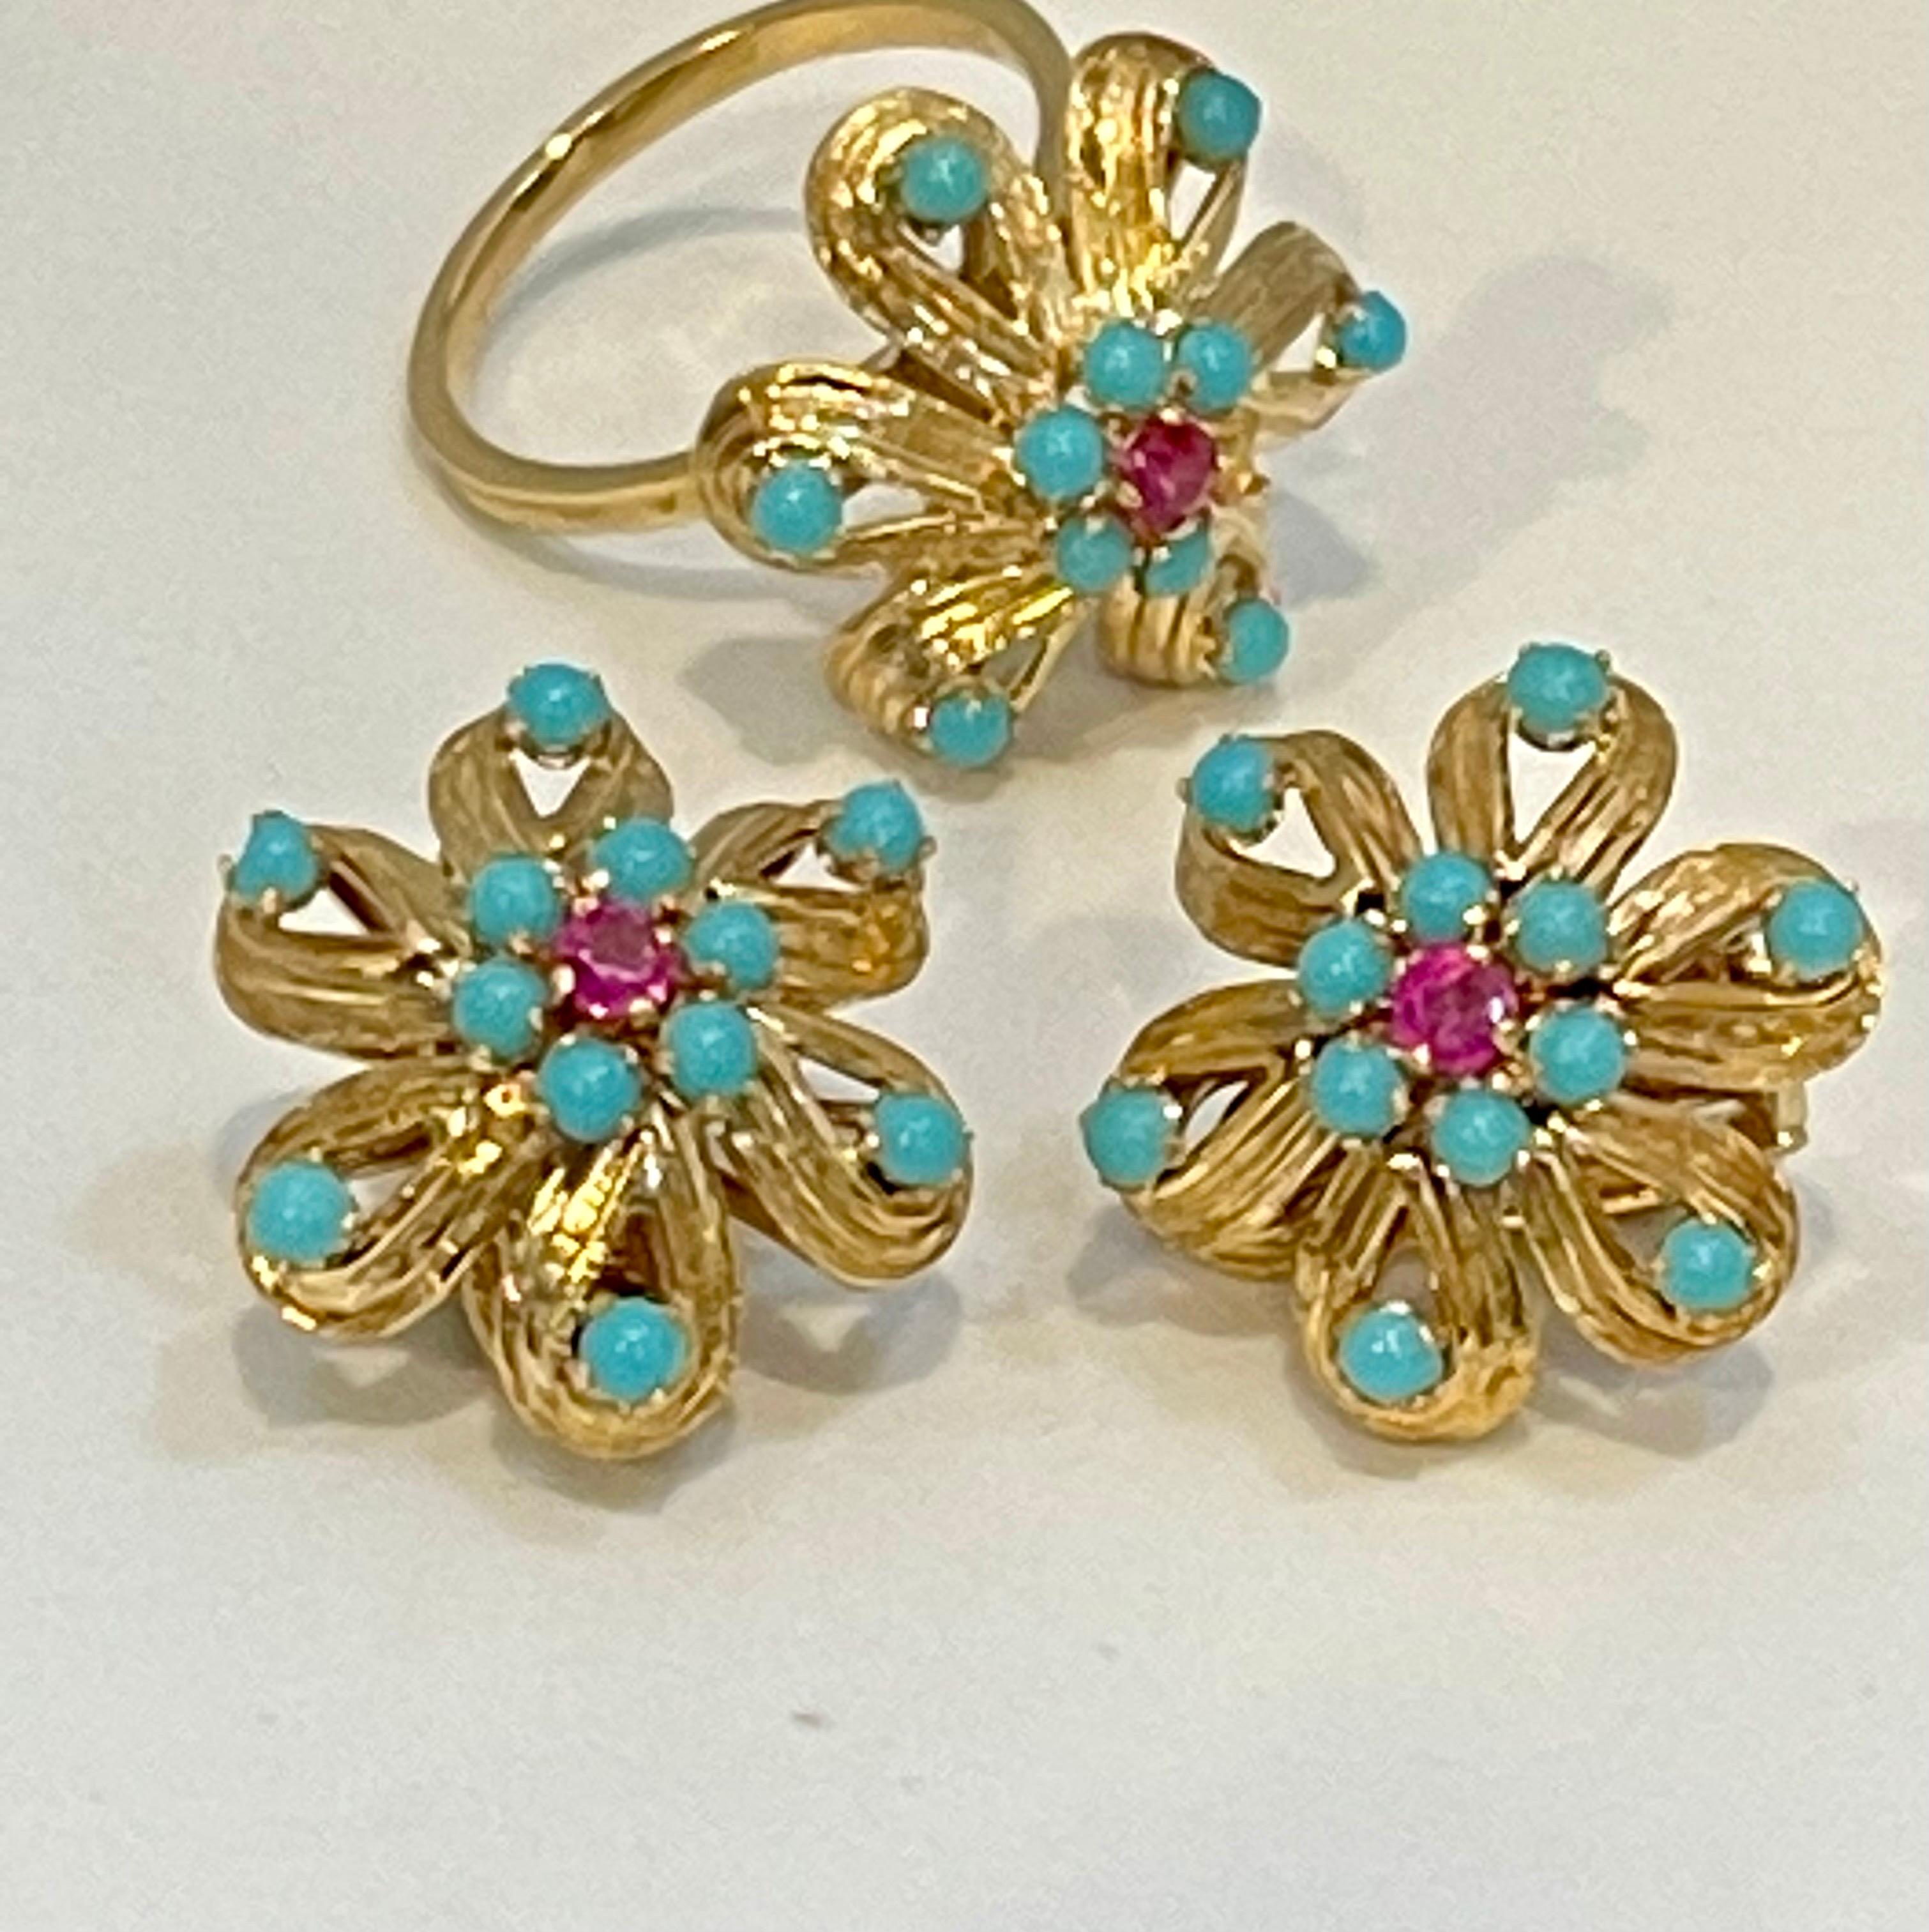 4 Ct Natural Turquoise & Ruby 18 Kt Yellow Gold Flower Ring & Earring Set 20Gm For Sale 2